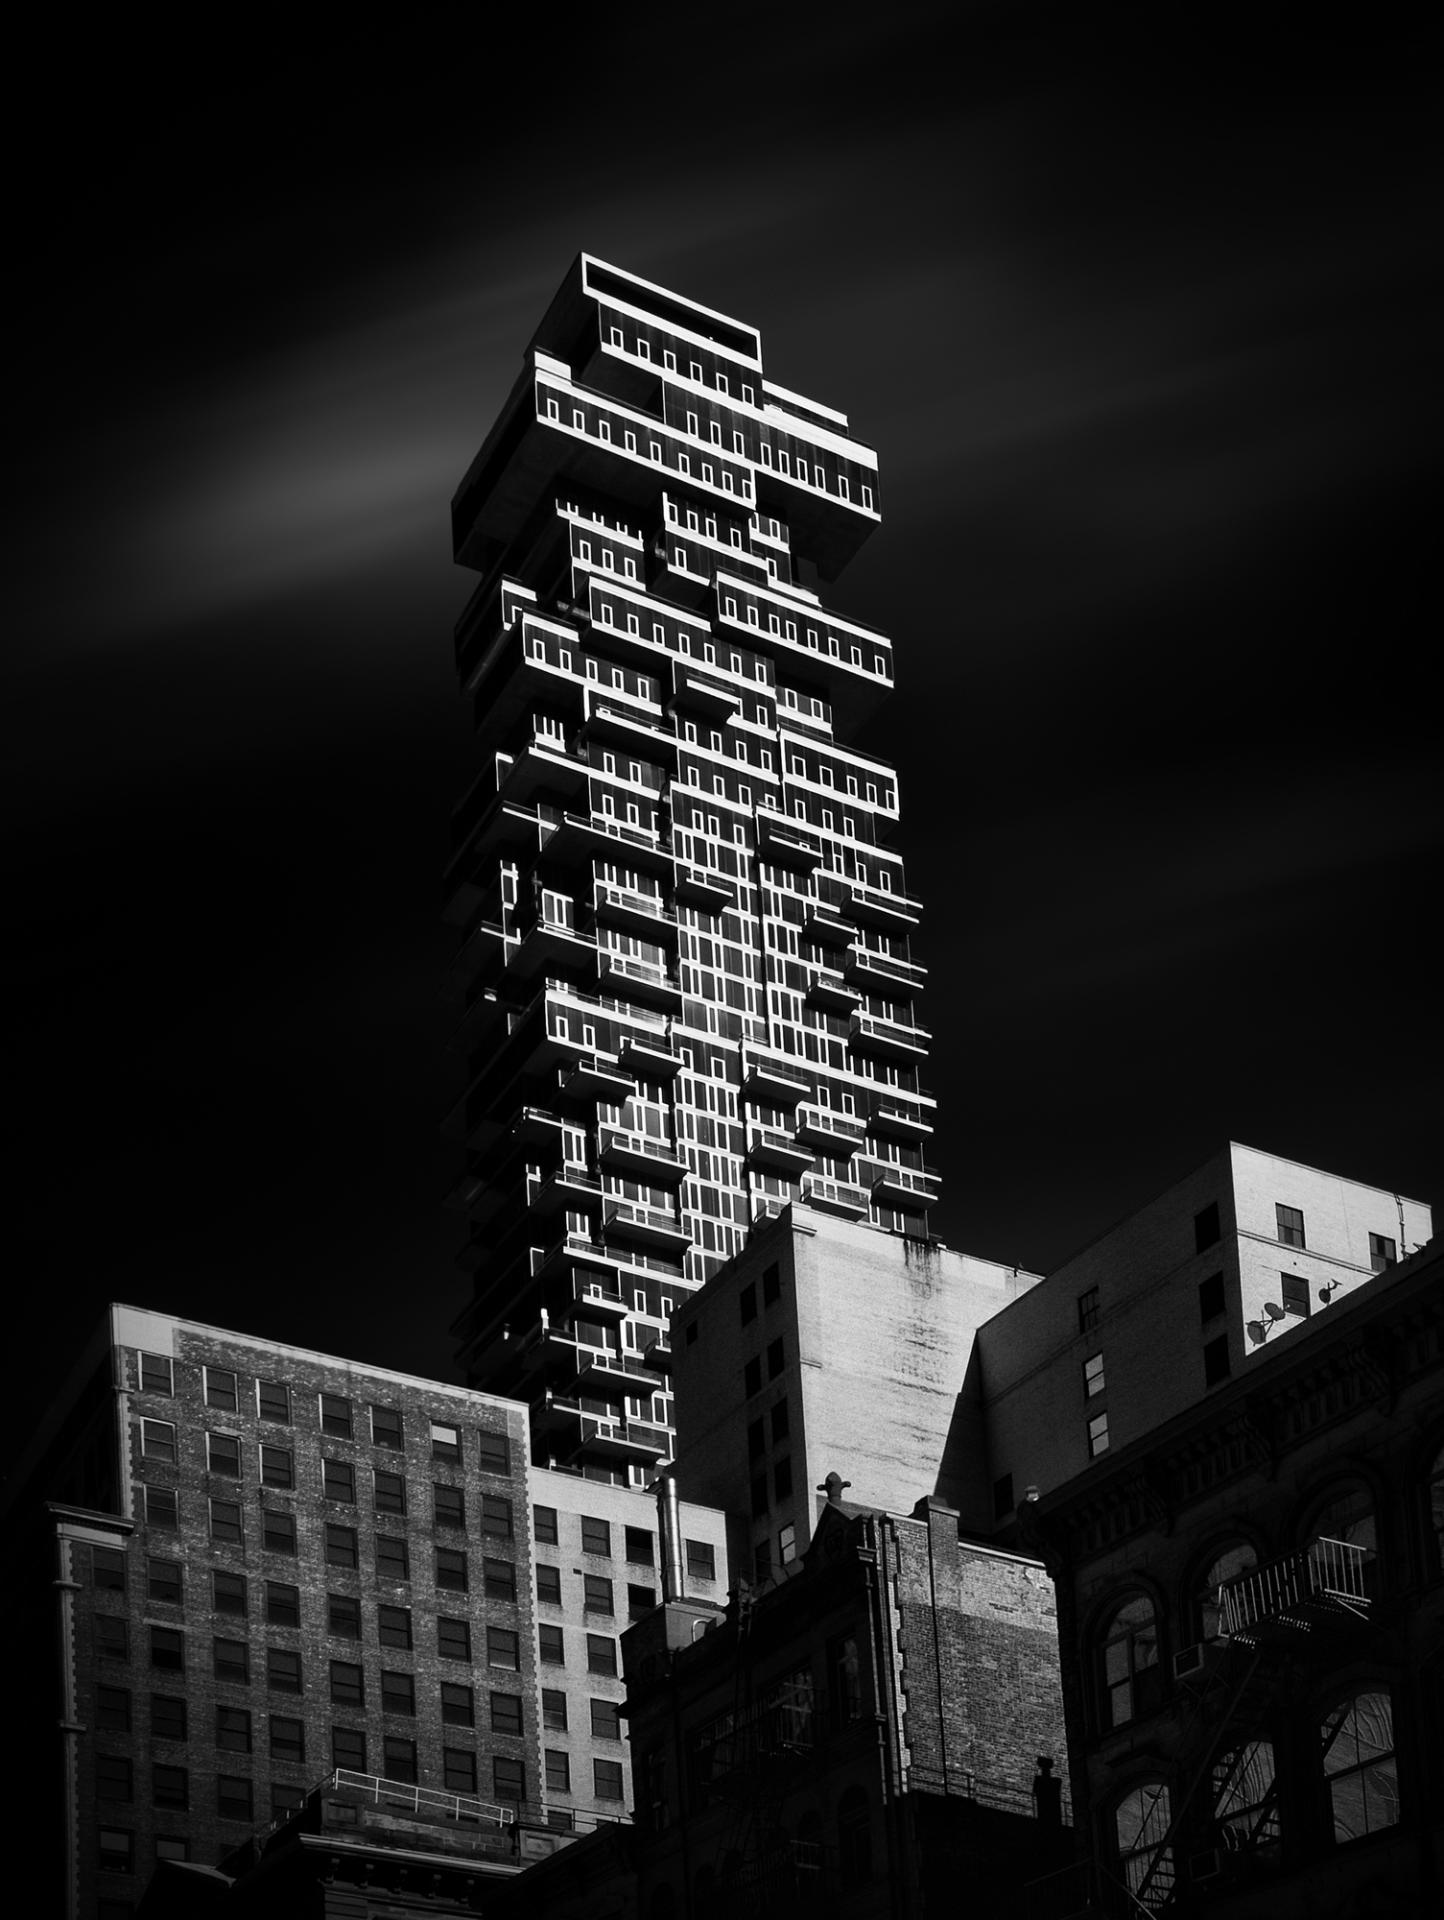 New York Photography Awards Winner - Invisible Light of NYC